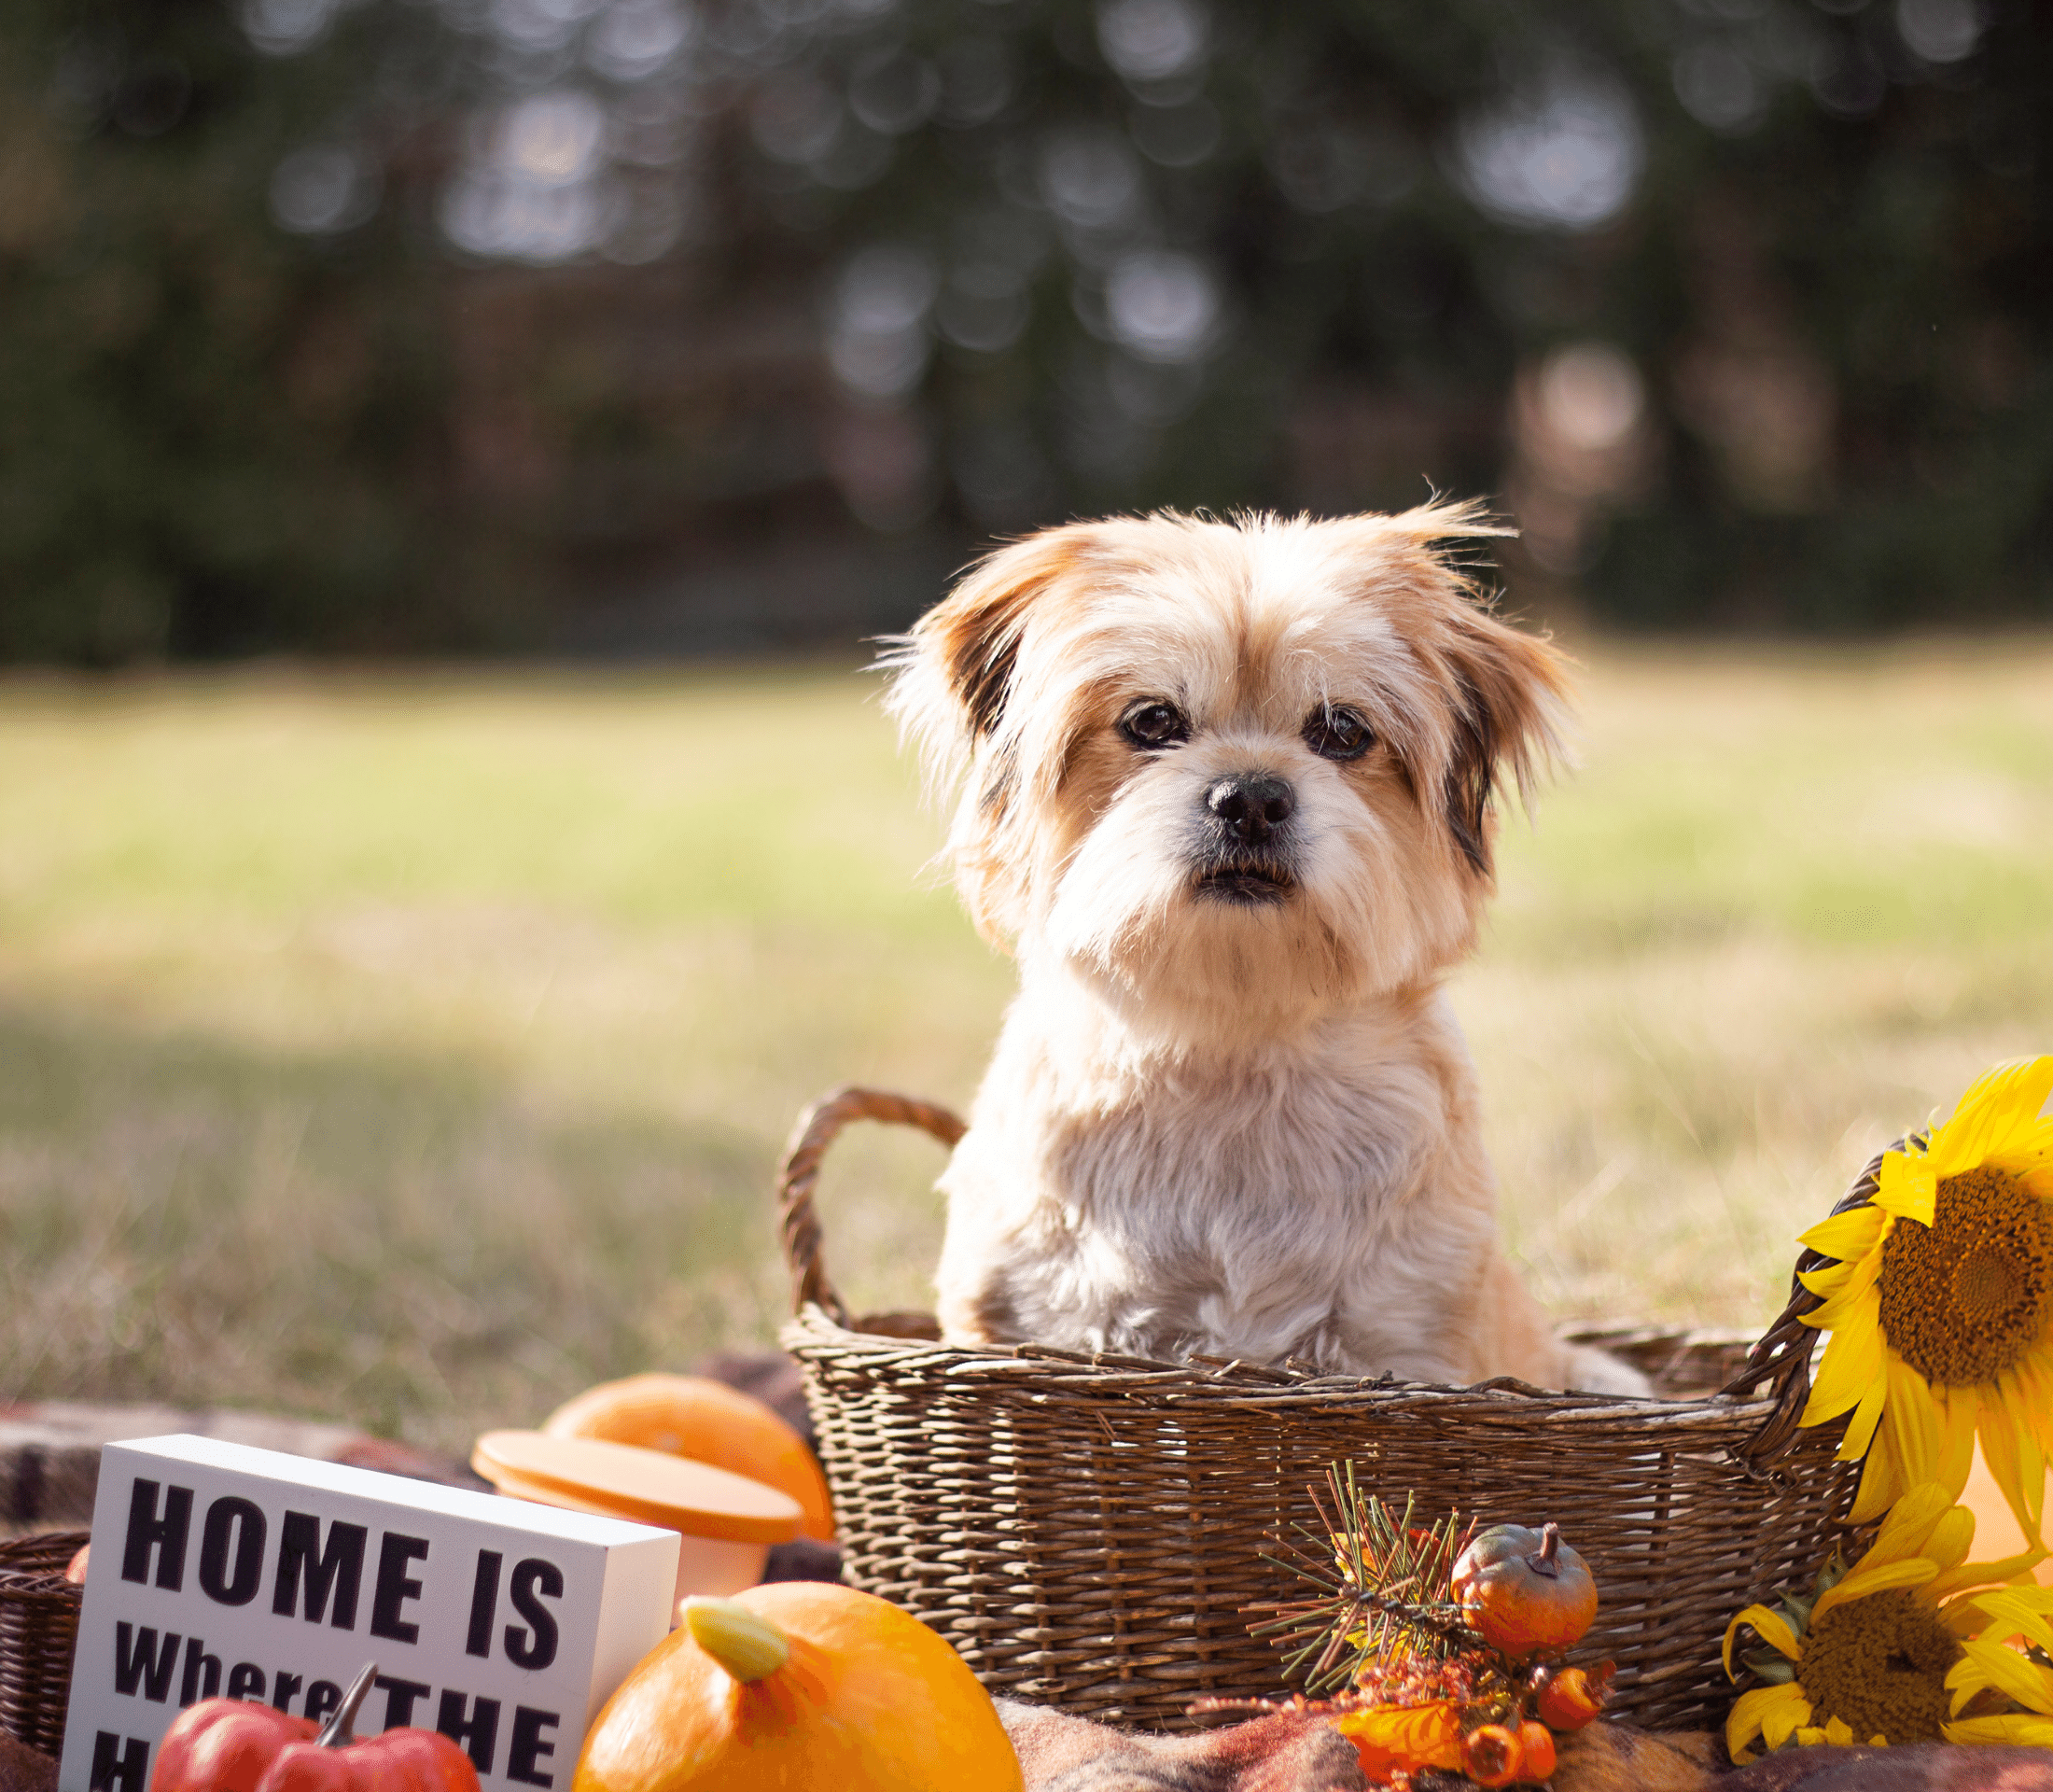 Terrier dog on a brown woven basket with flowers around